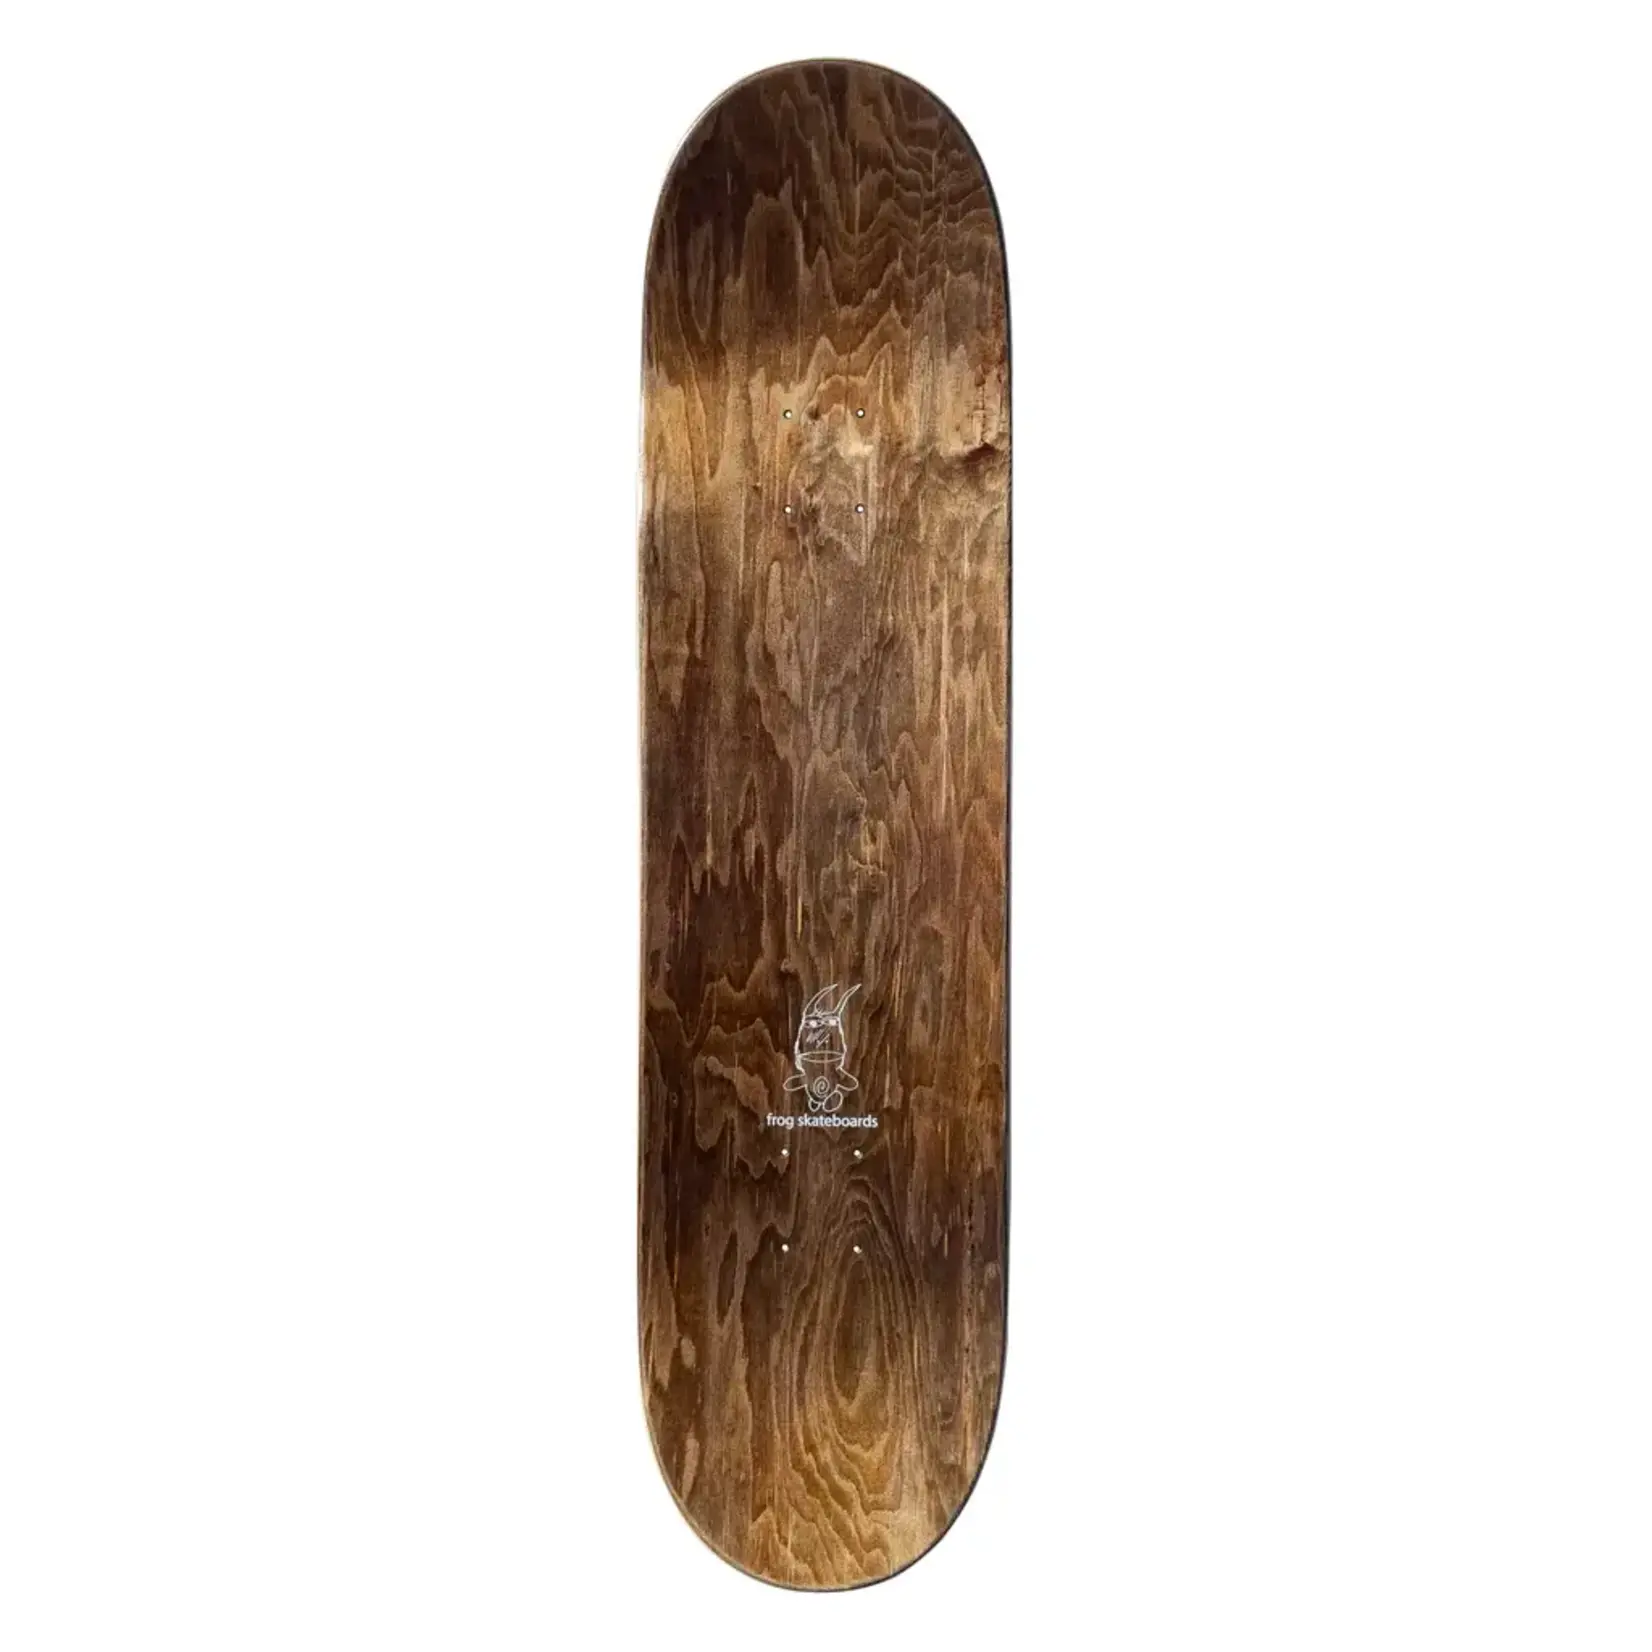 Frog Frog Pat G Unleashed Deck - 8.38" x 32" x 14.125"